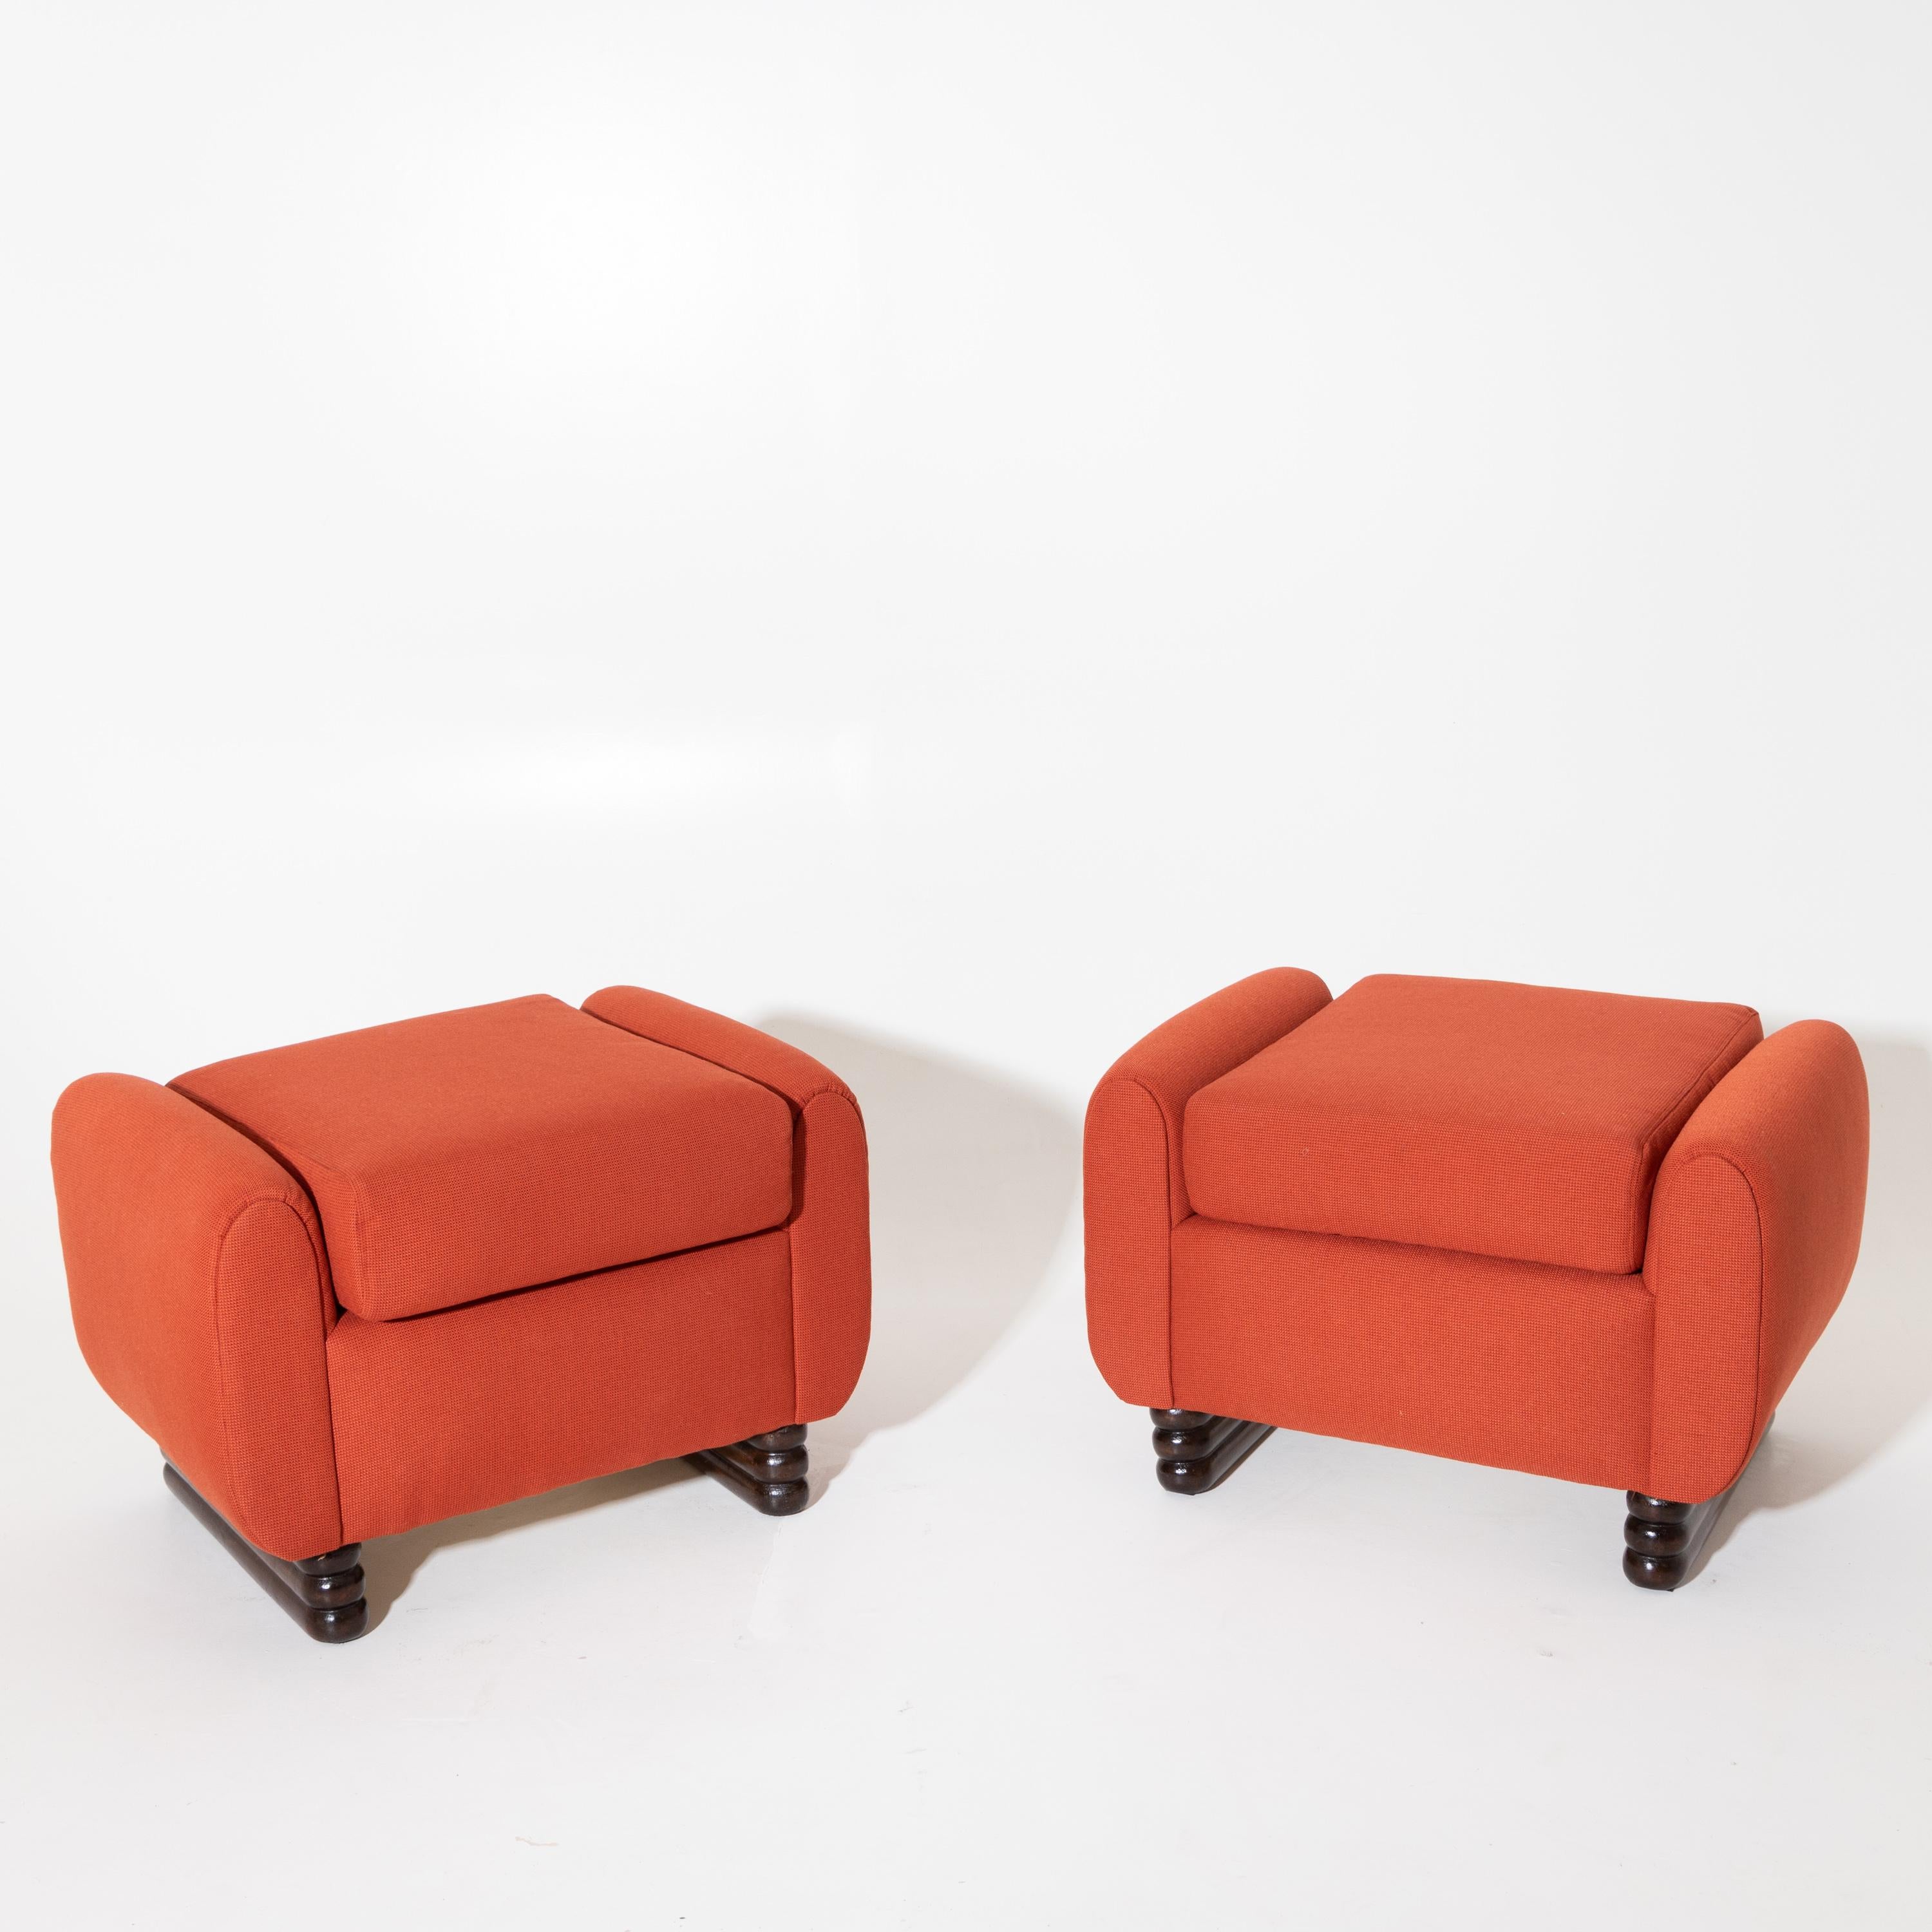 Two stools on wavy wooden legs with red-covered seats, attributed to Vittorio Valabrega.